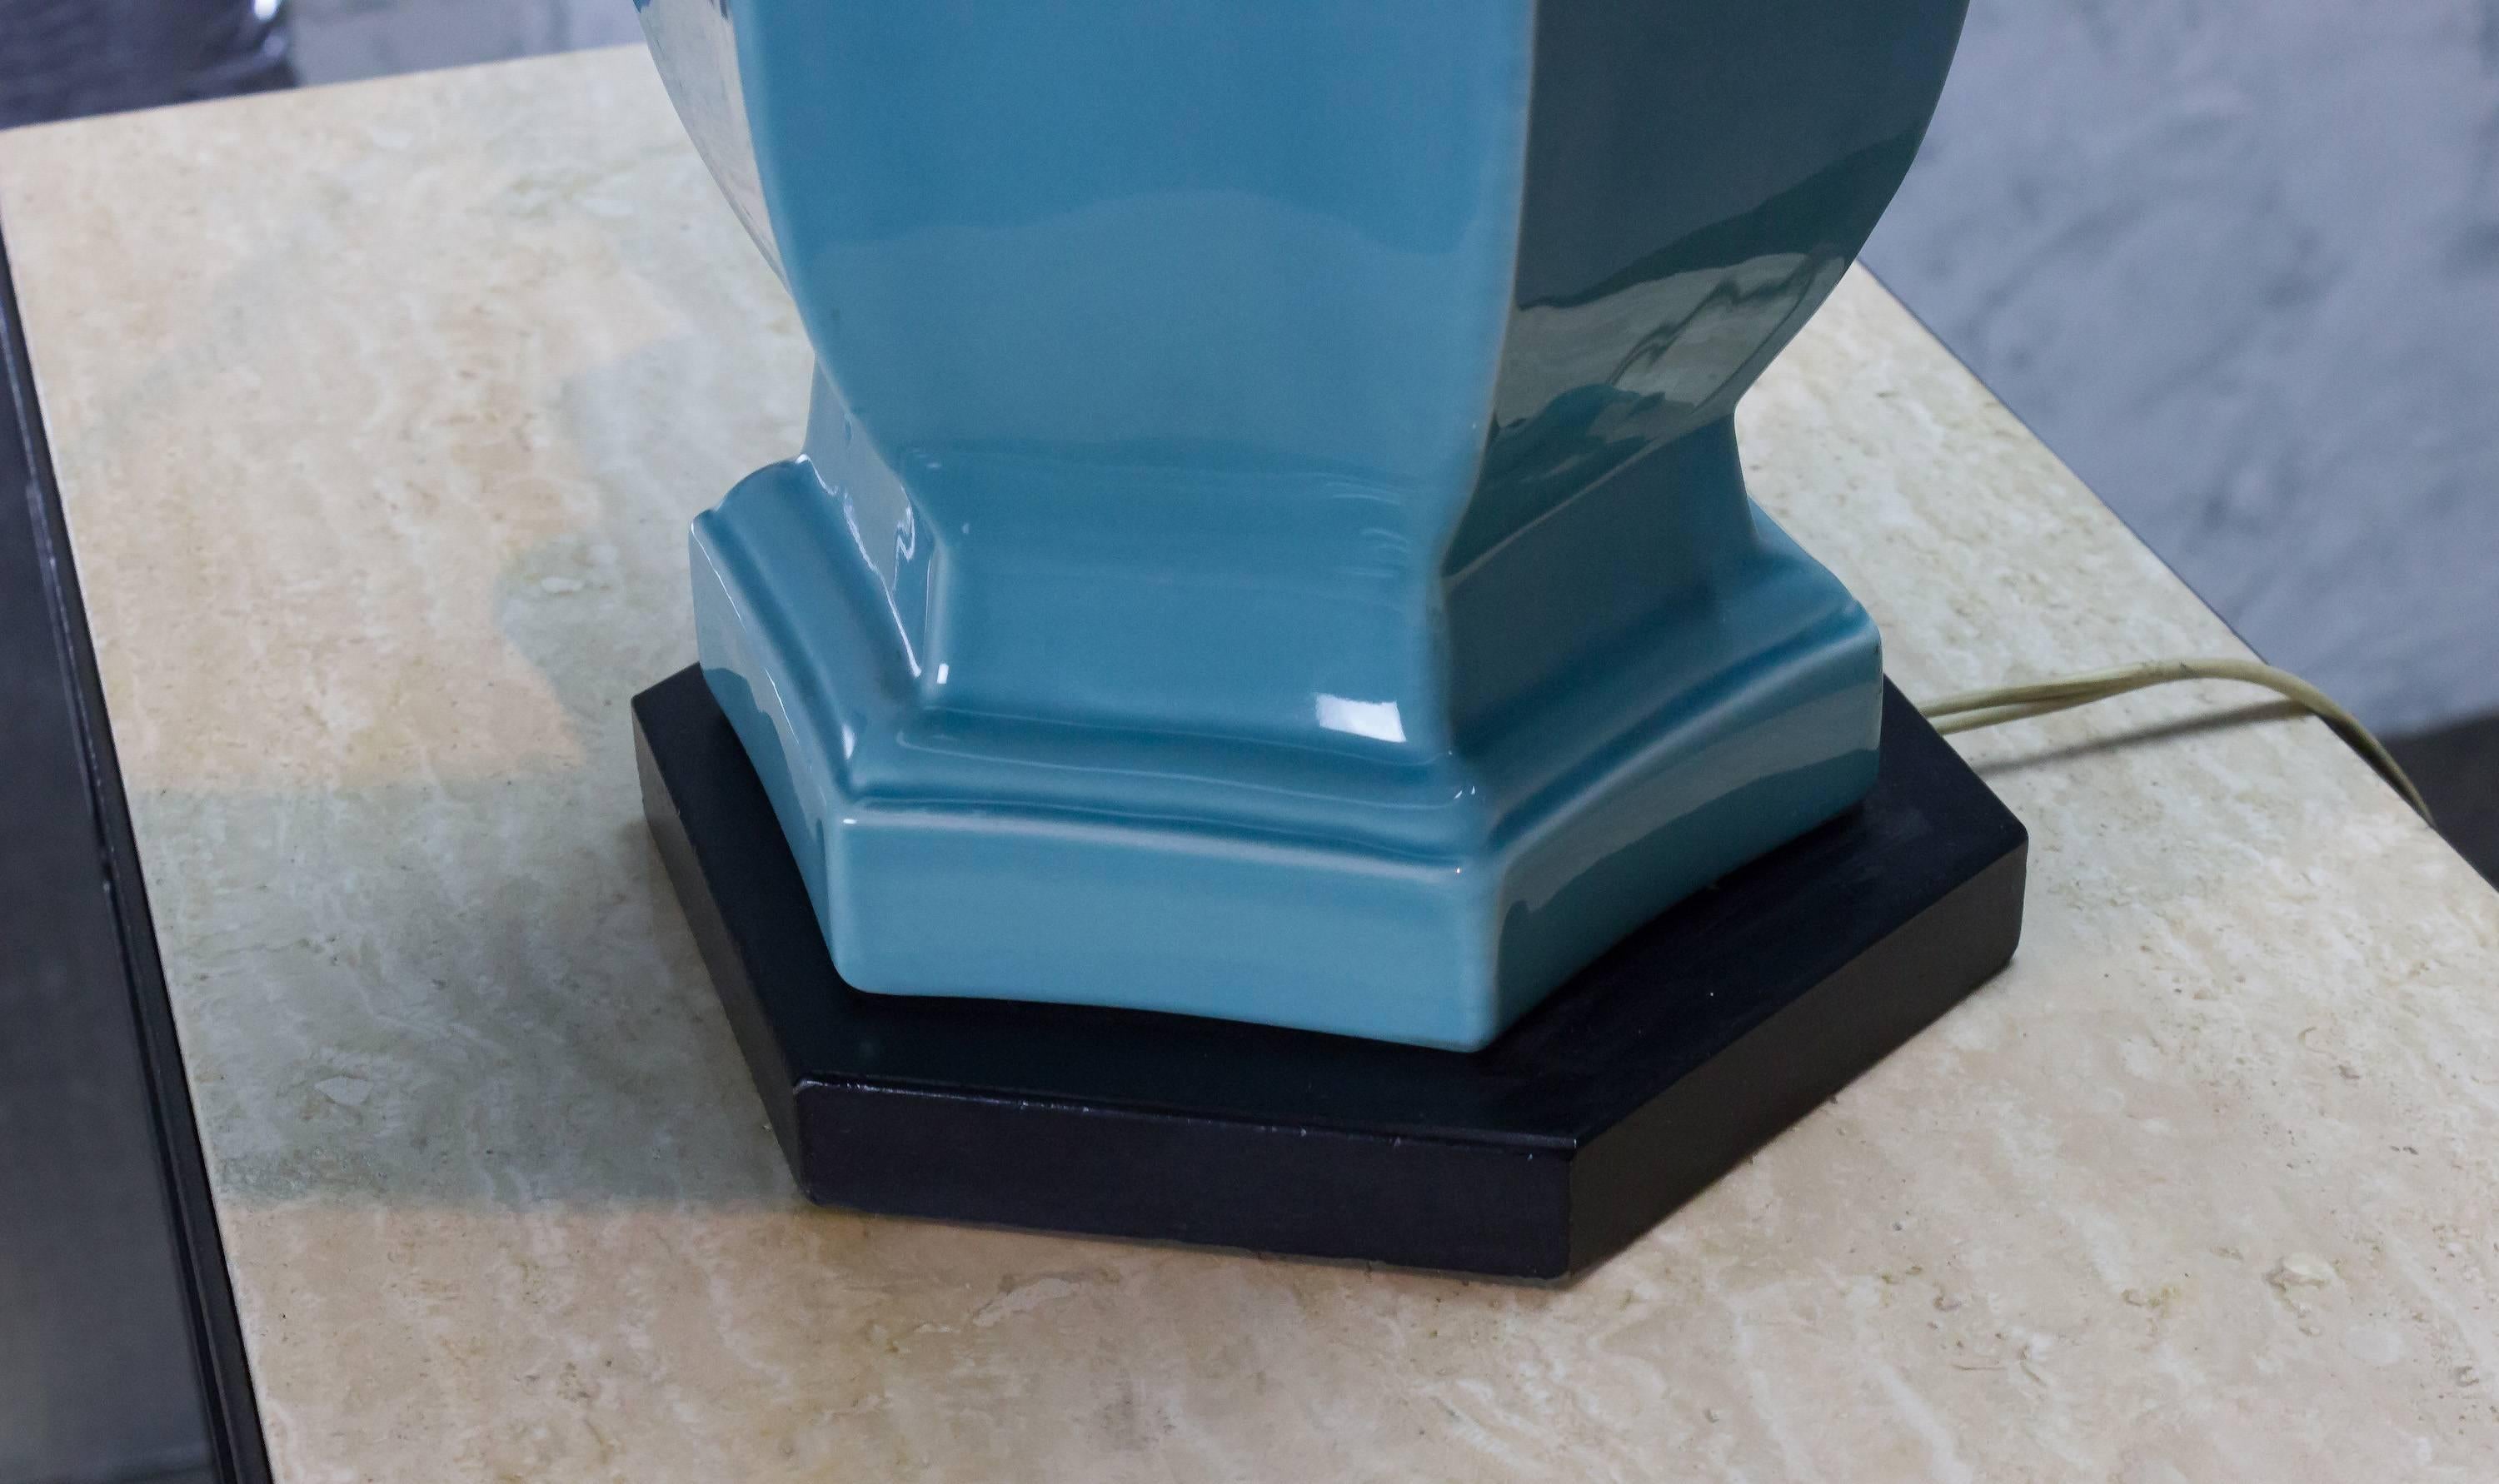 This 1950s American glazed ceramic lamp has a unique design that features a beautifully detailed ceramic body, finished with a high-gloss glaze in turquoise blue. The lamp sits atop a sleek black wooden base that perfectly complements the ceramic